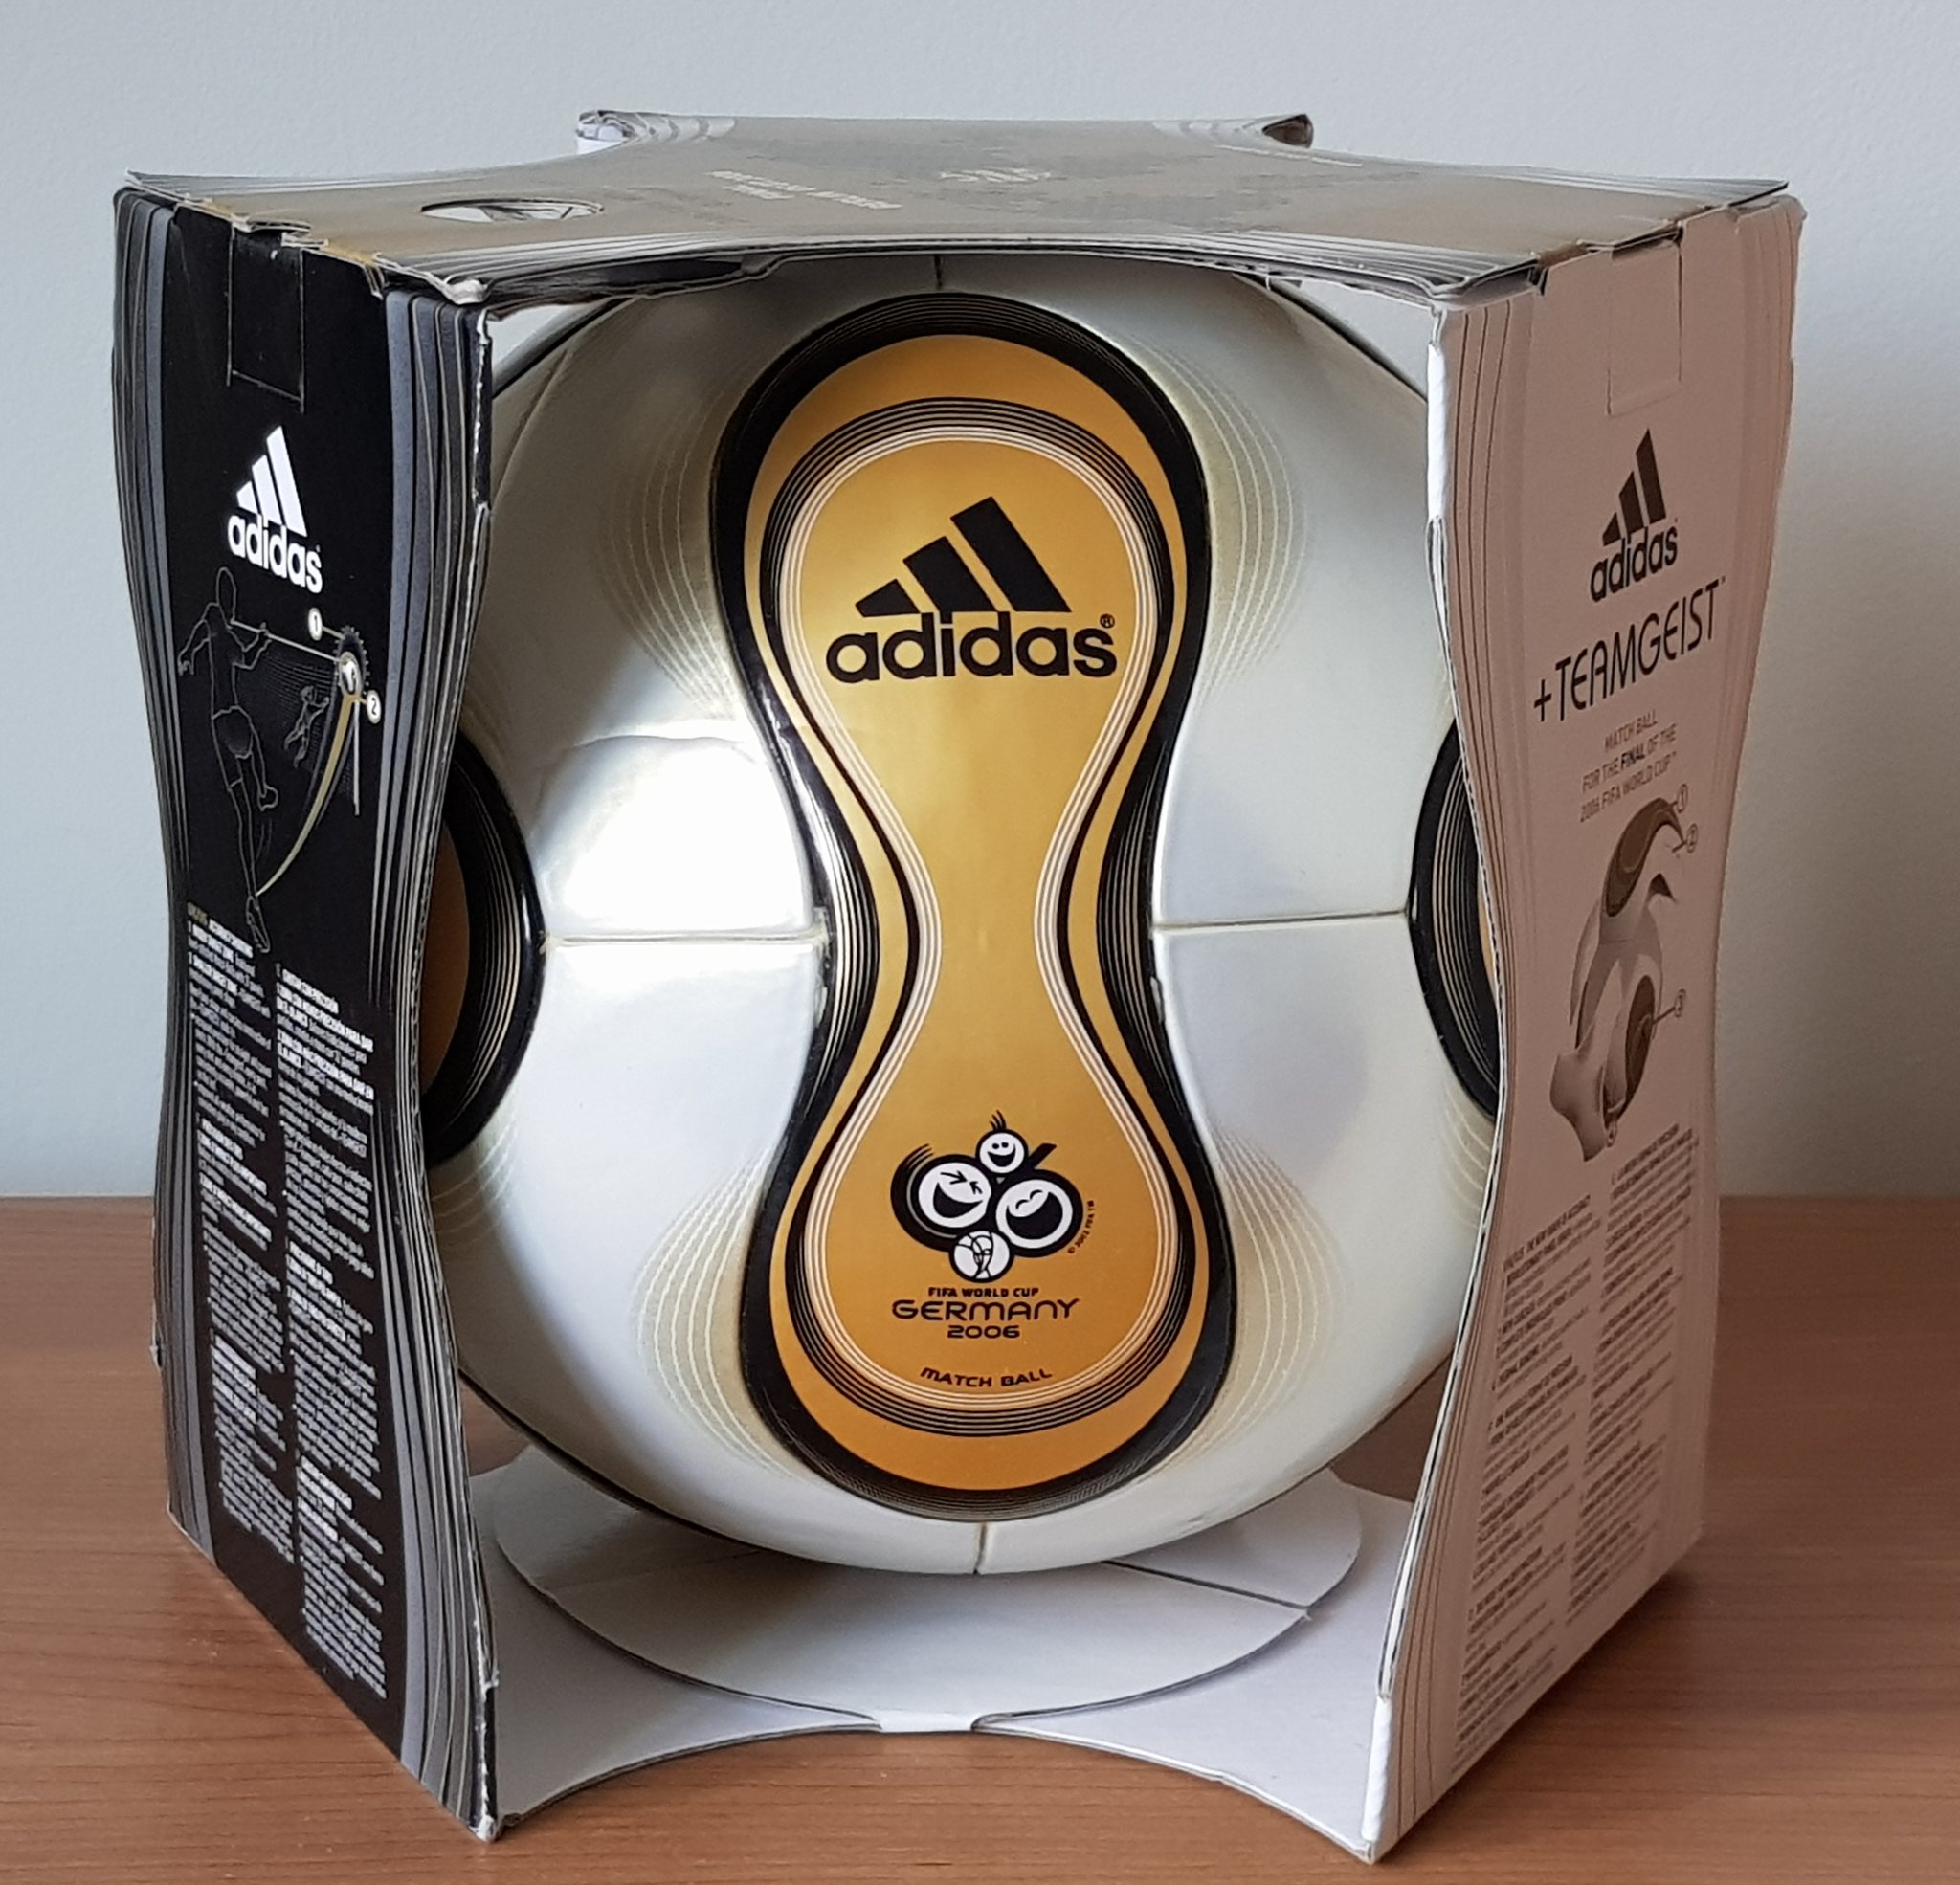 marxista césped Perder la paciencia Rob Filby on Twitter: "Adidas Teamgeist Berlin - 2006 World Cup Final  Official Match Ball - the first ever ball specifically for a final of a  world cup #teamgeist #wm06 #omb https://t.co/DvGwOPCdtw" /